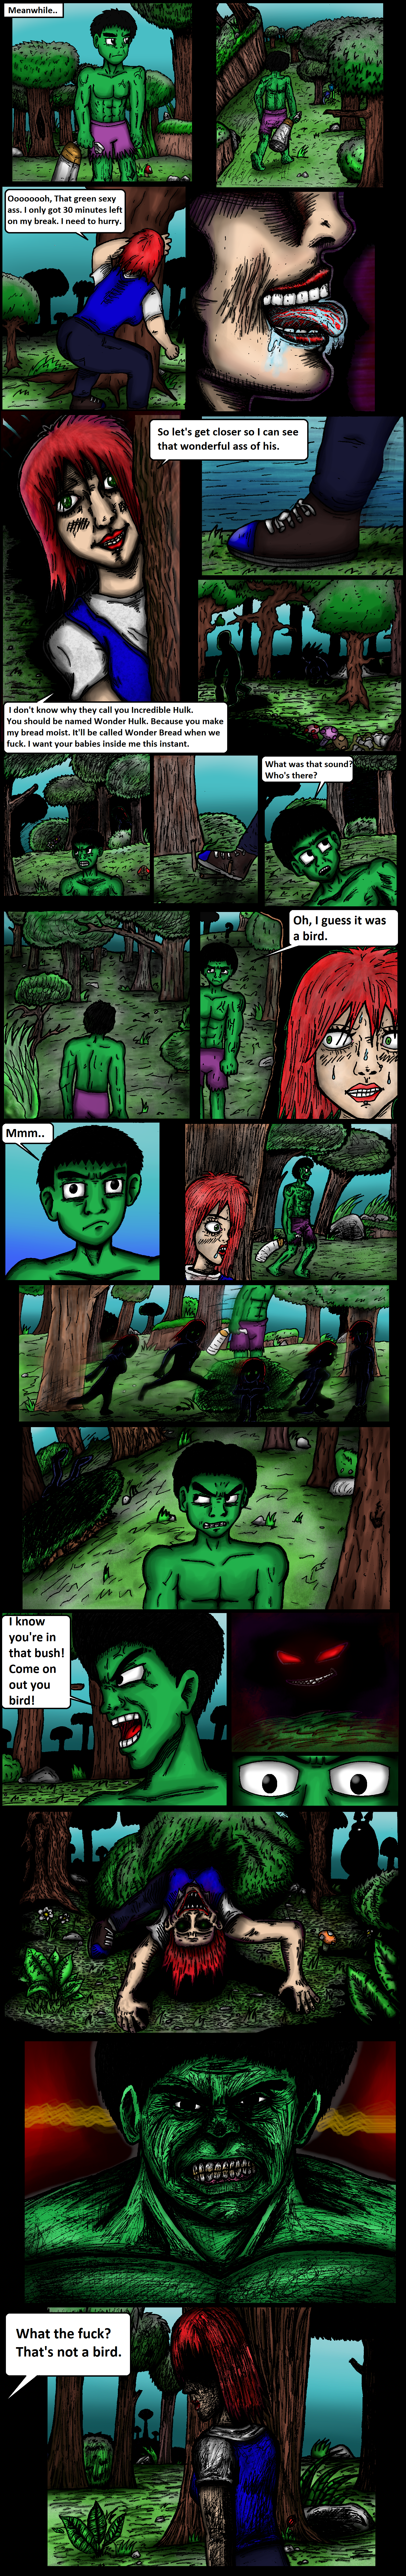 ch26/pg16.png. If you're seeing this, enable images. Or, perhaps we have a website issue. Try refreshing, if unsuccessful email c@commodorian.org with a detailed description of how you got here.